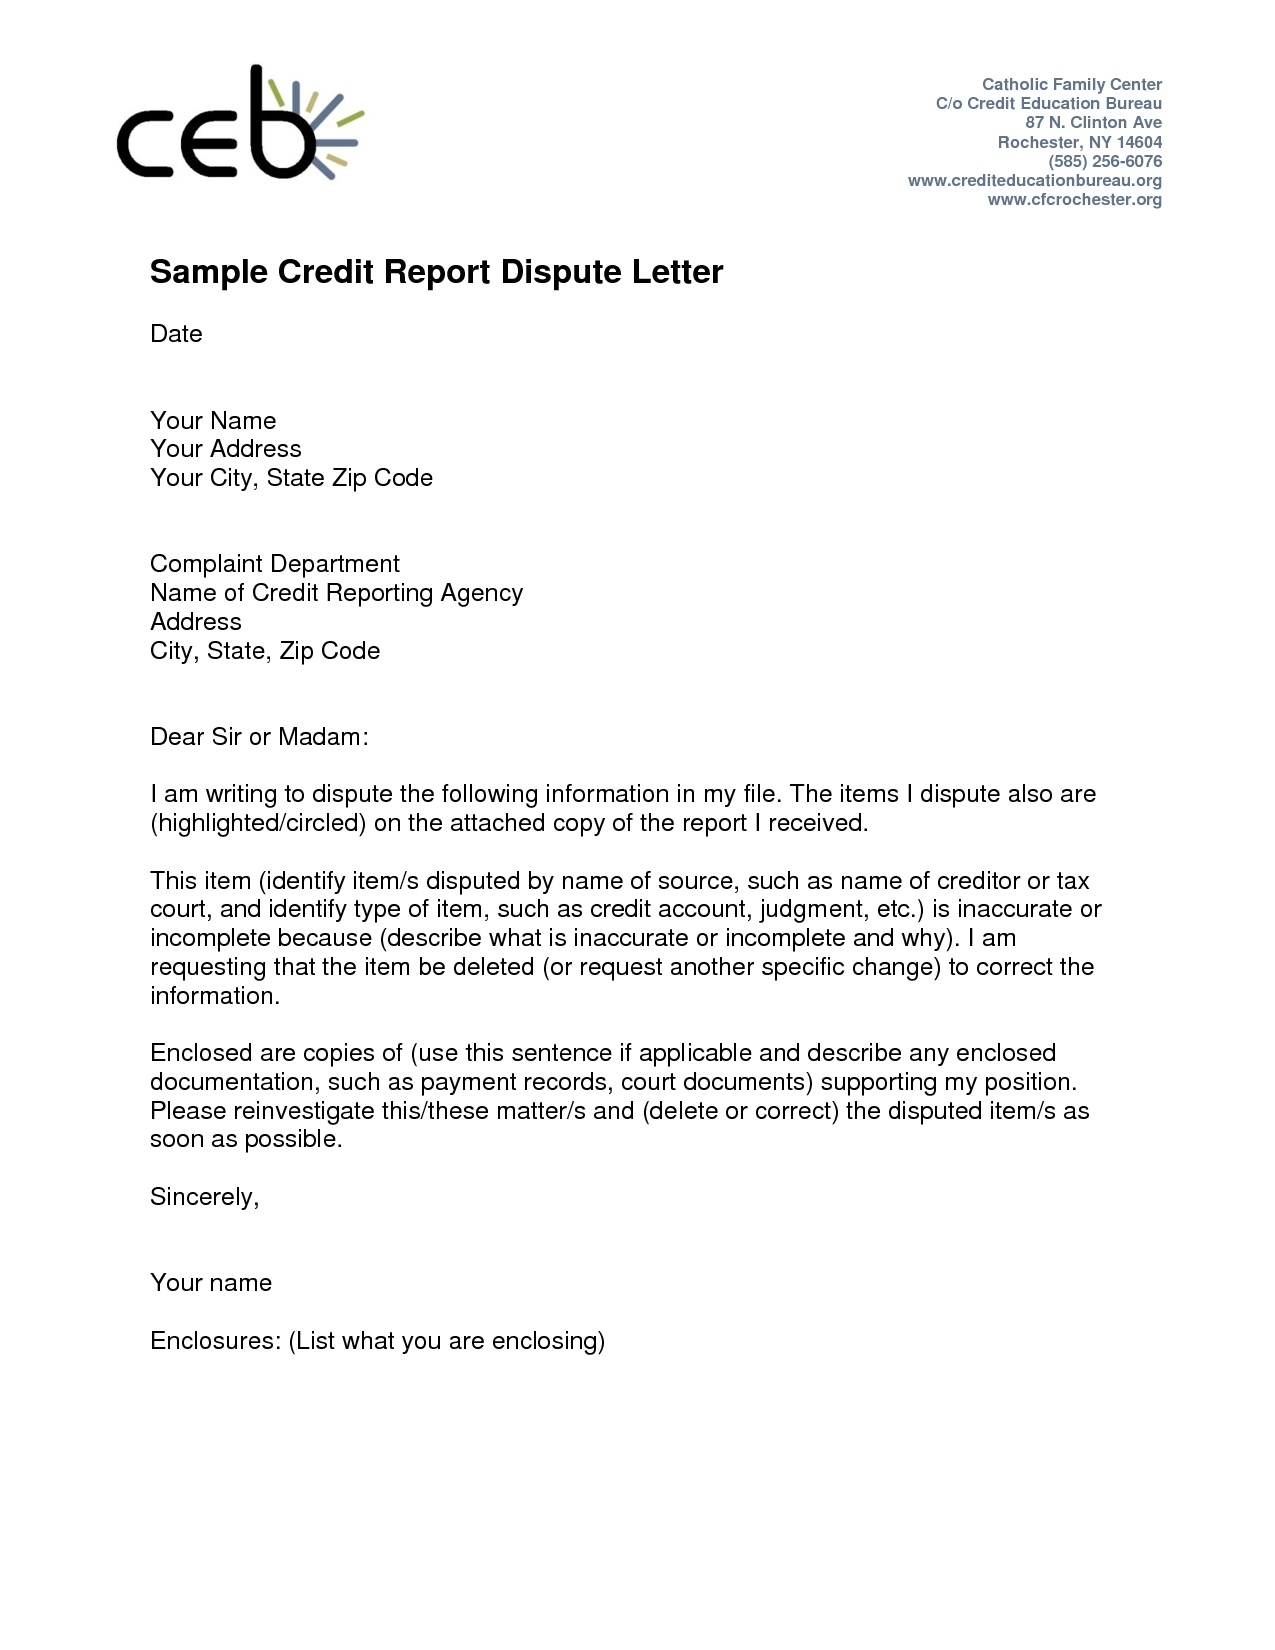 Credit Inquiry Removal Letter Template - Credit Dispute Letter Templates Acurnamedia